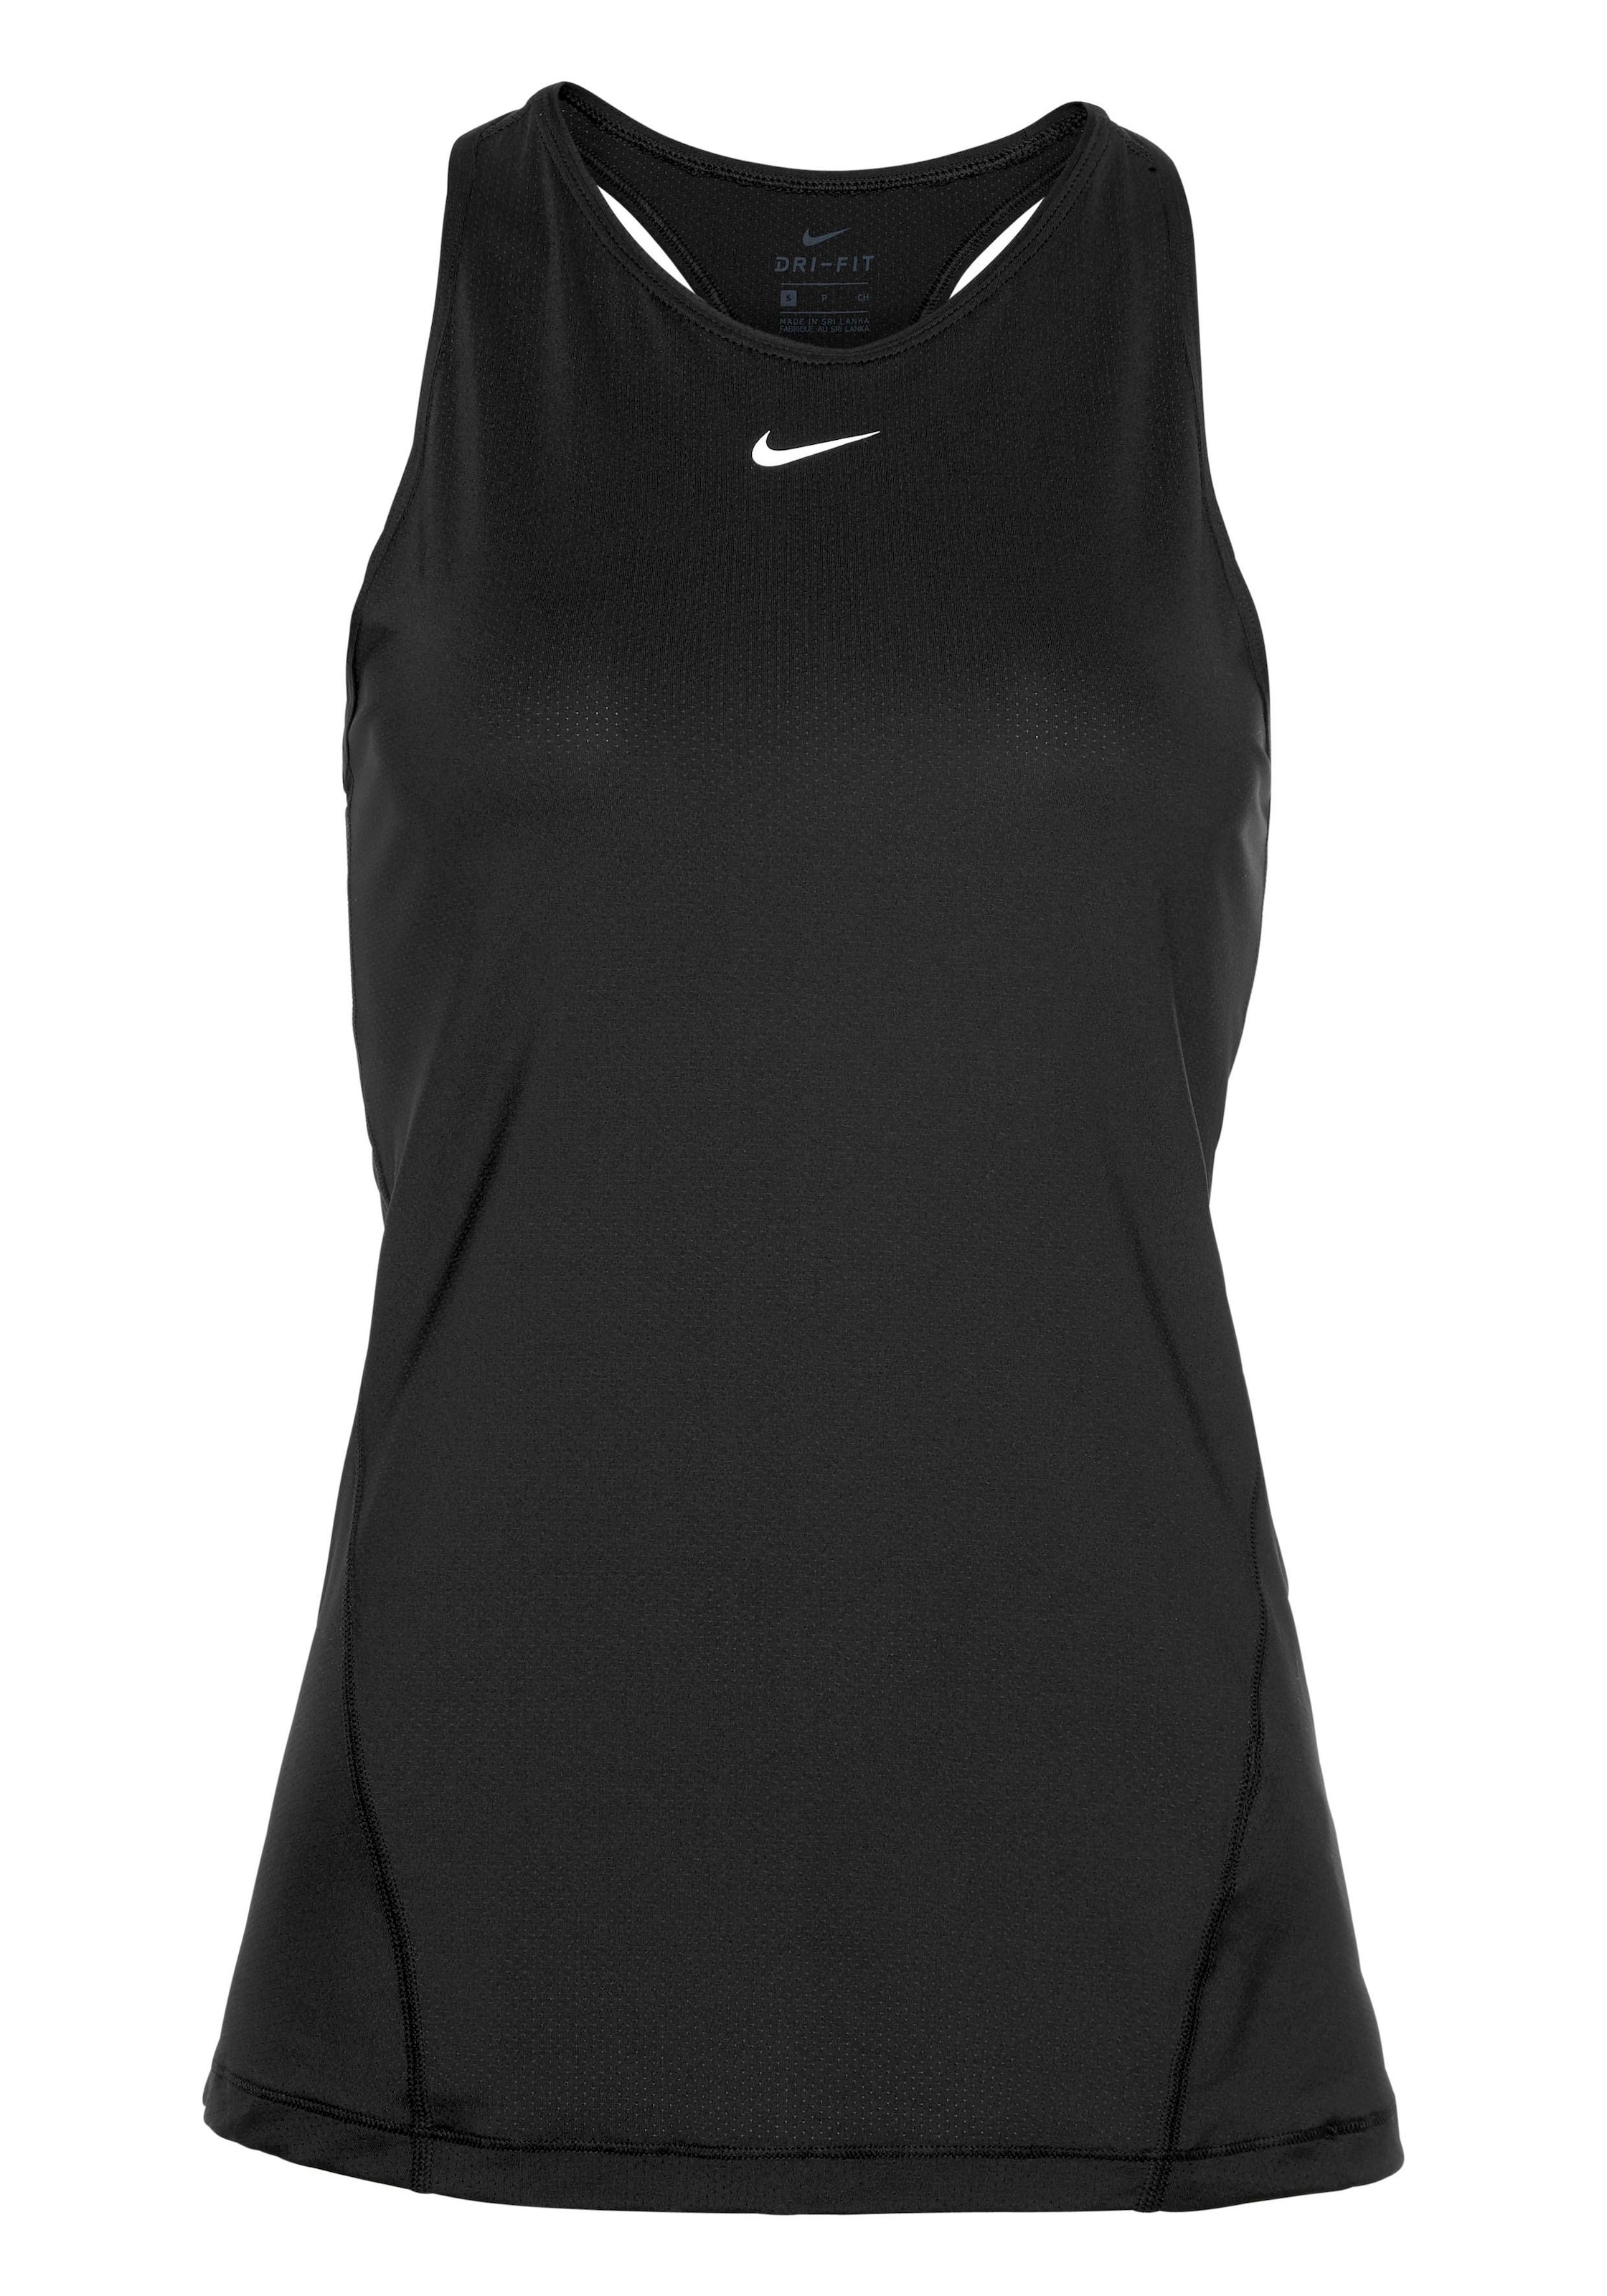 Nike online »WOMAN NP Funktionstop MESH« ALL TANK OVER